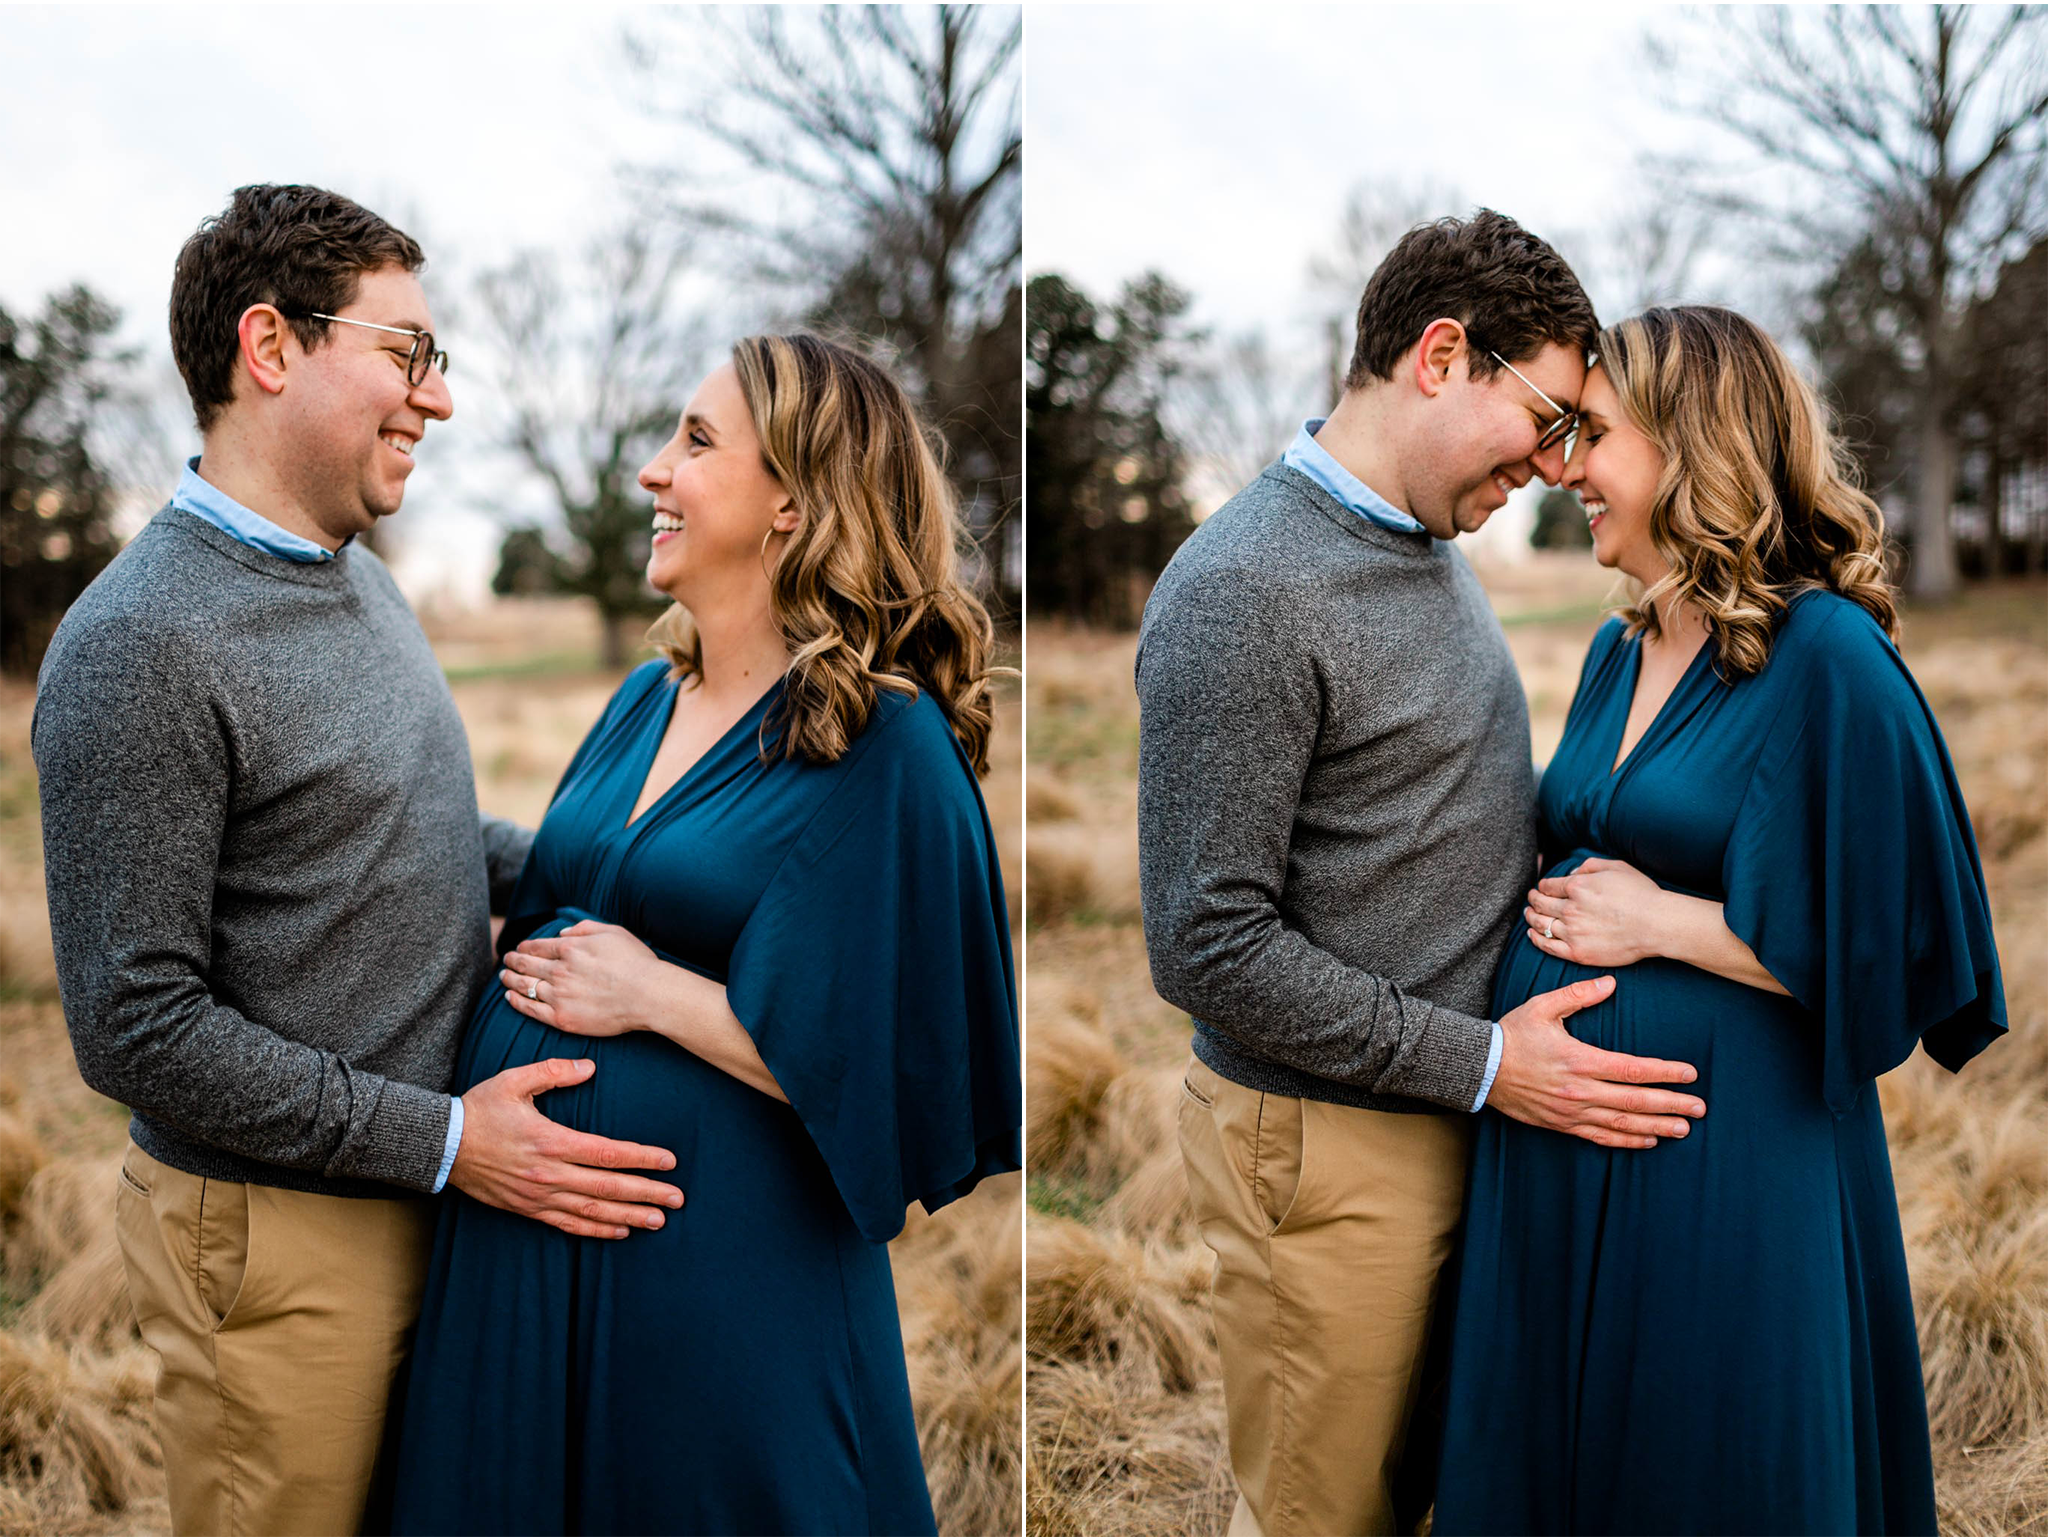 Raleigh Newborn Photographer | By G. Lin Photography | Man and woman laughing while standing in grassy field